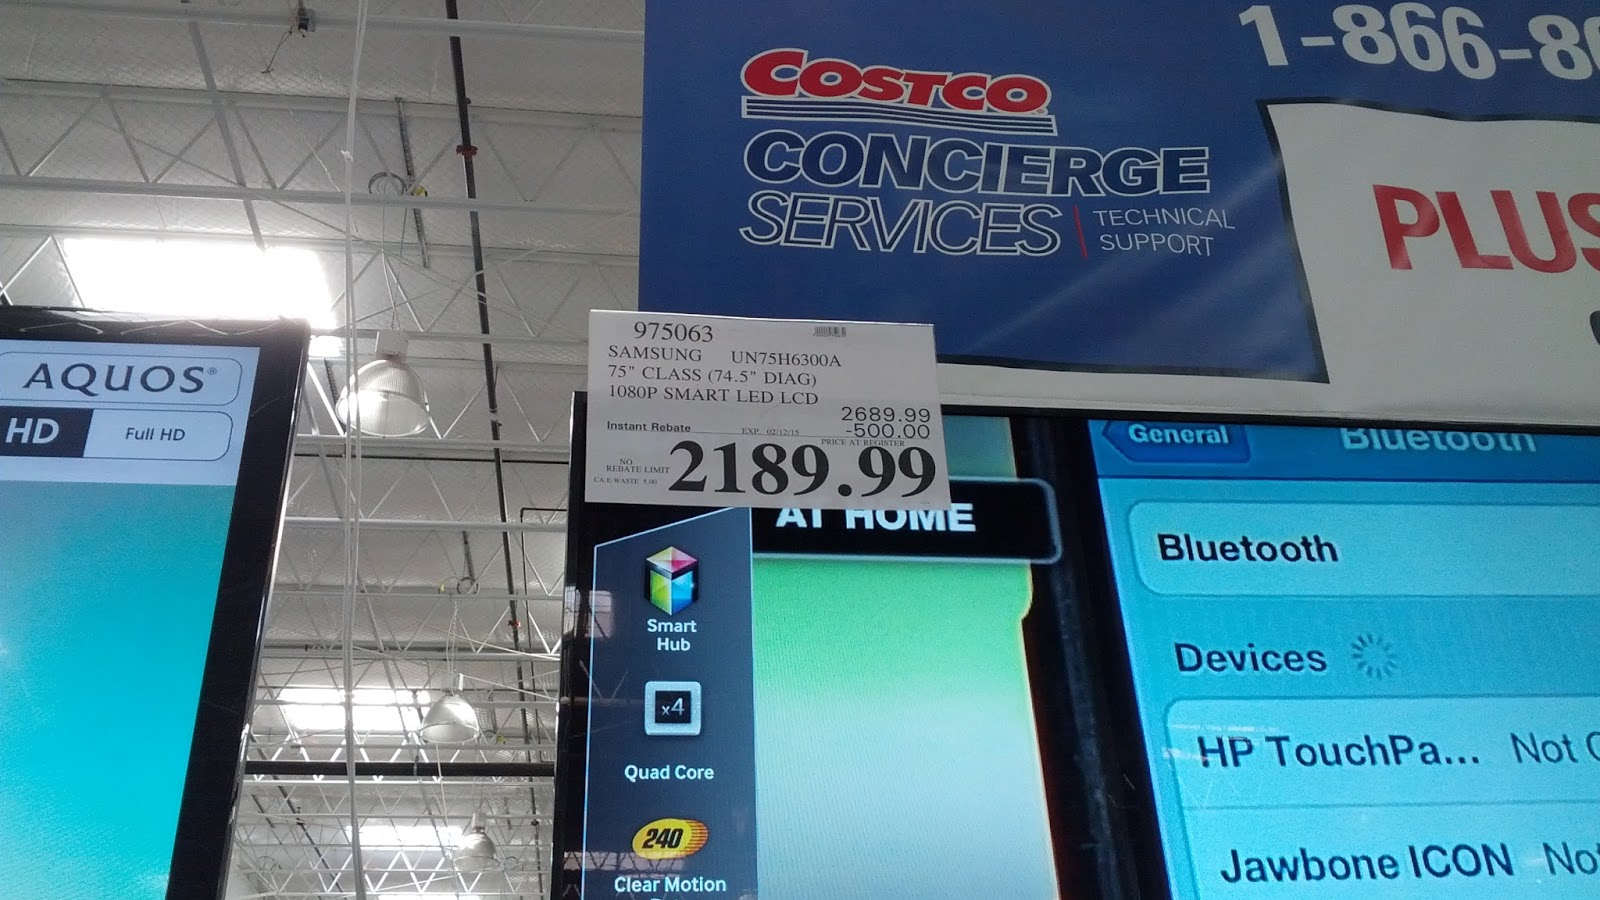 Samsung UN75H6300A 75 LED LCD HDTV Costco Weekender